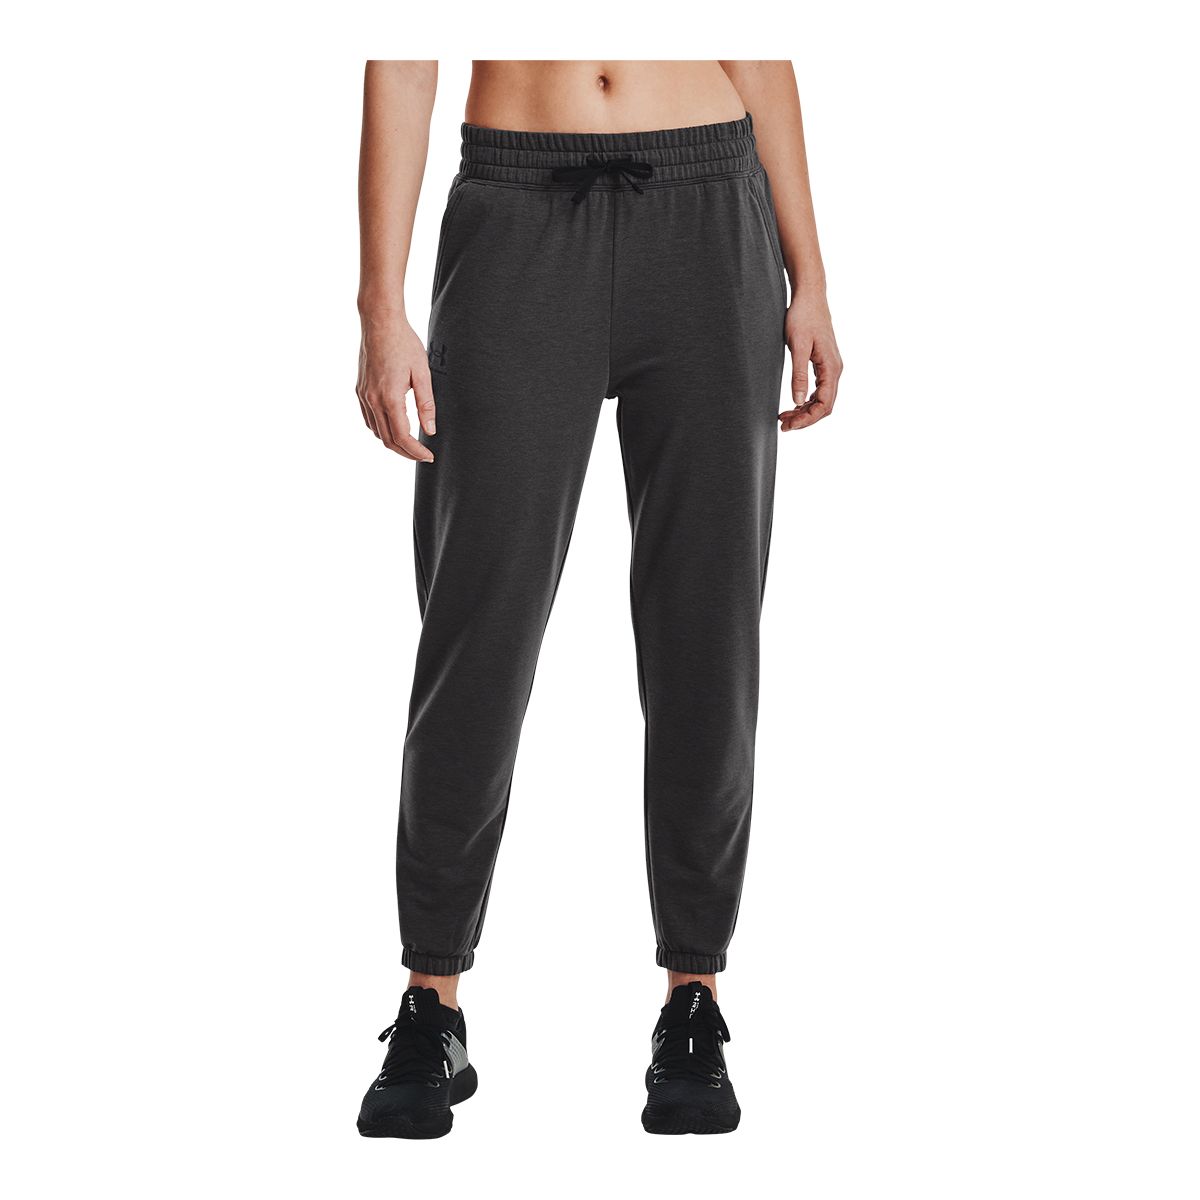 Under Armour Women's Rival Terry Jogger Pants